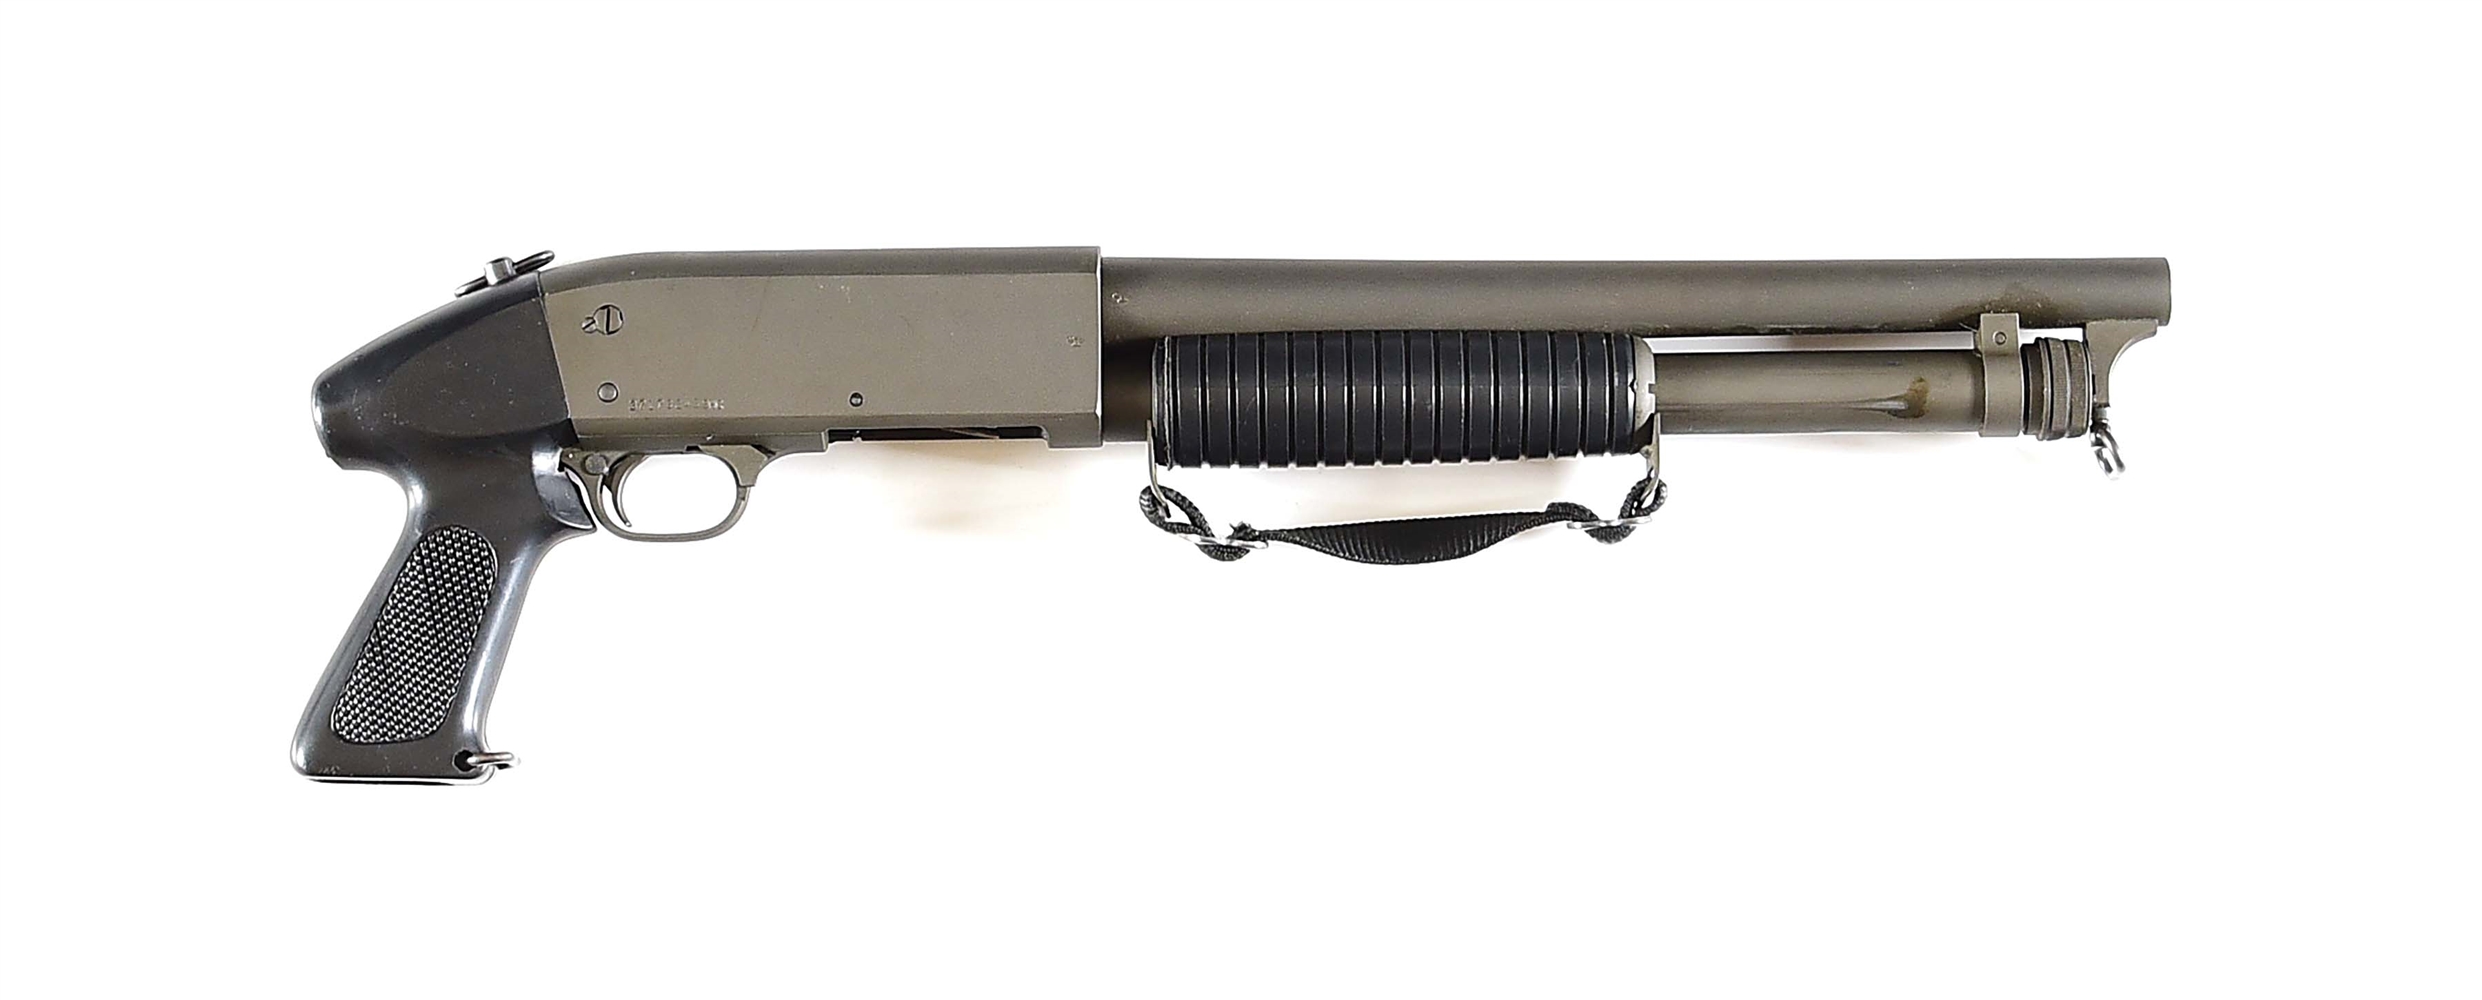 (N) ITHACA MODEL 37 STAKEOUT 12 BORE SLIDE ACTION SHOTGUN (ANY OTHER WEAPON).